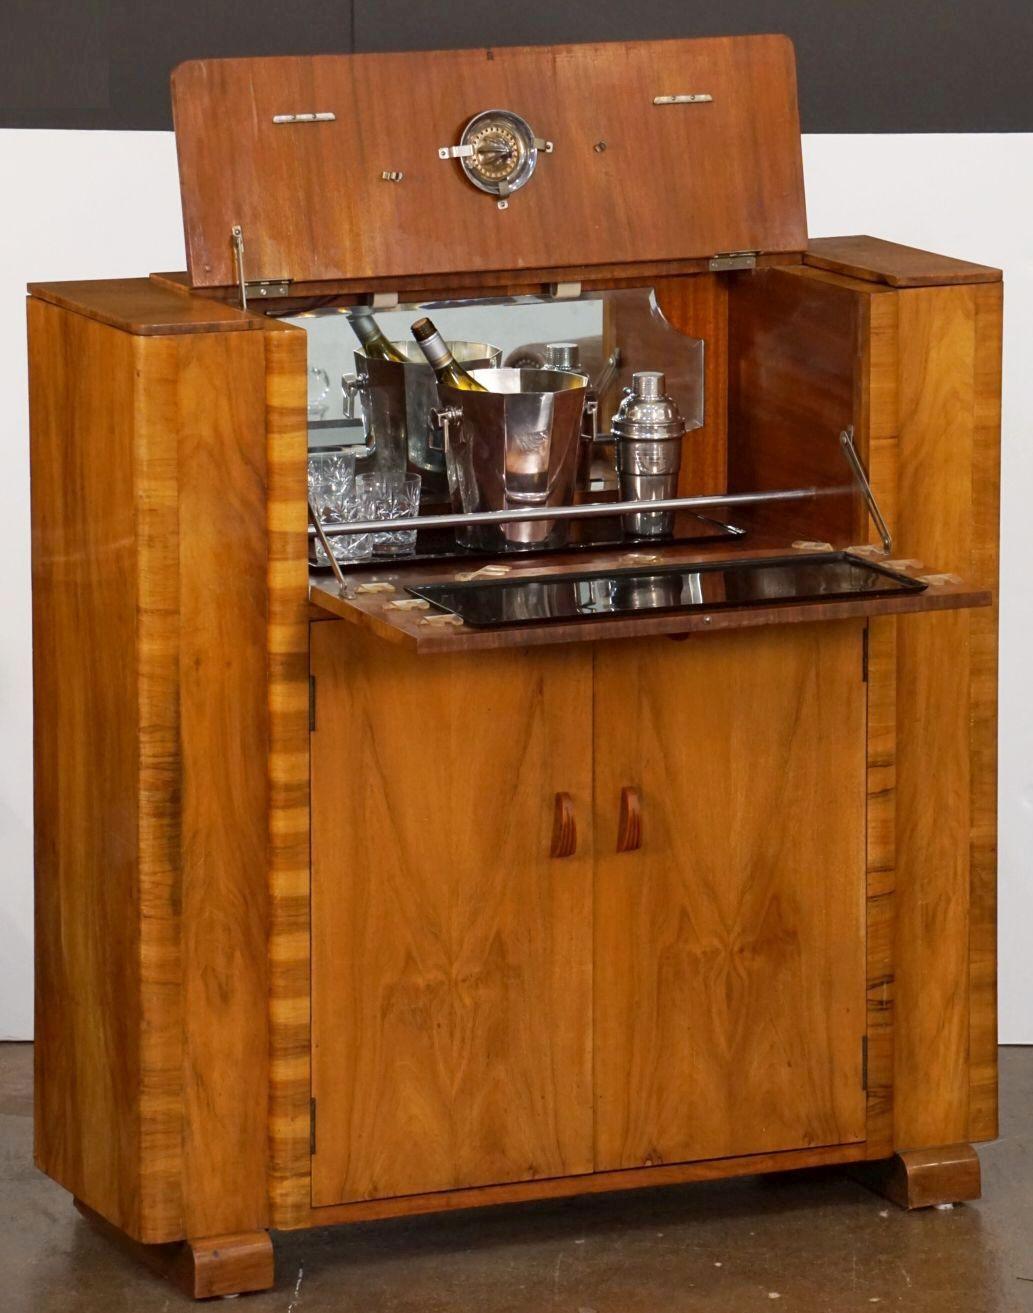 A fine English upright cocktail bar cabinet or drinks cupboard of flame and toned walnut from the Art Deco Period.

Featuring a dry bar top - opening to reveal a lighted, bevel-mirrored glass interior, with drop-down shelf for preparing cocktails,